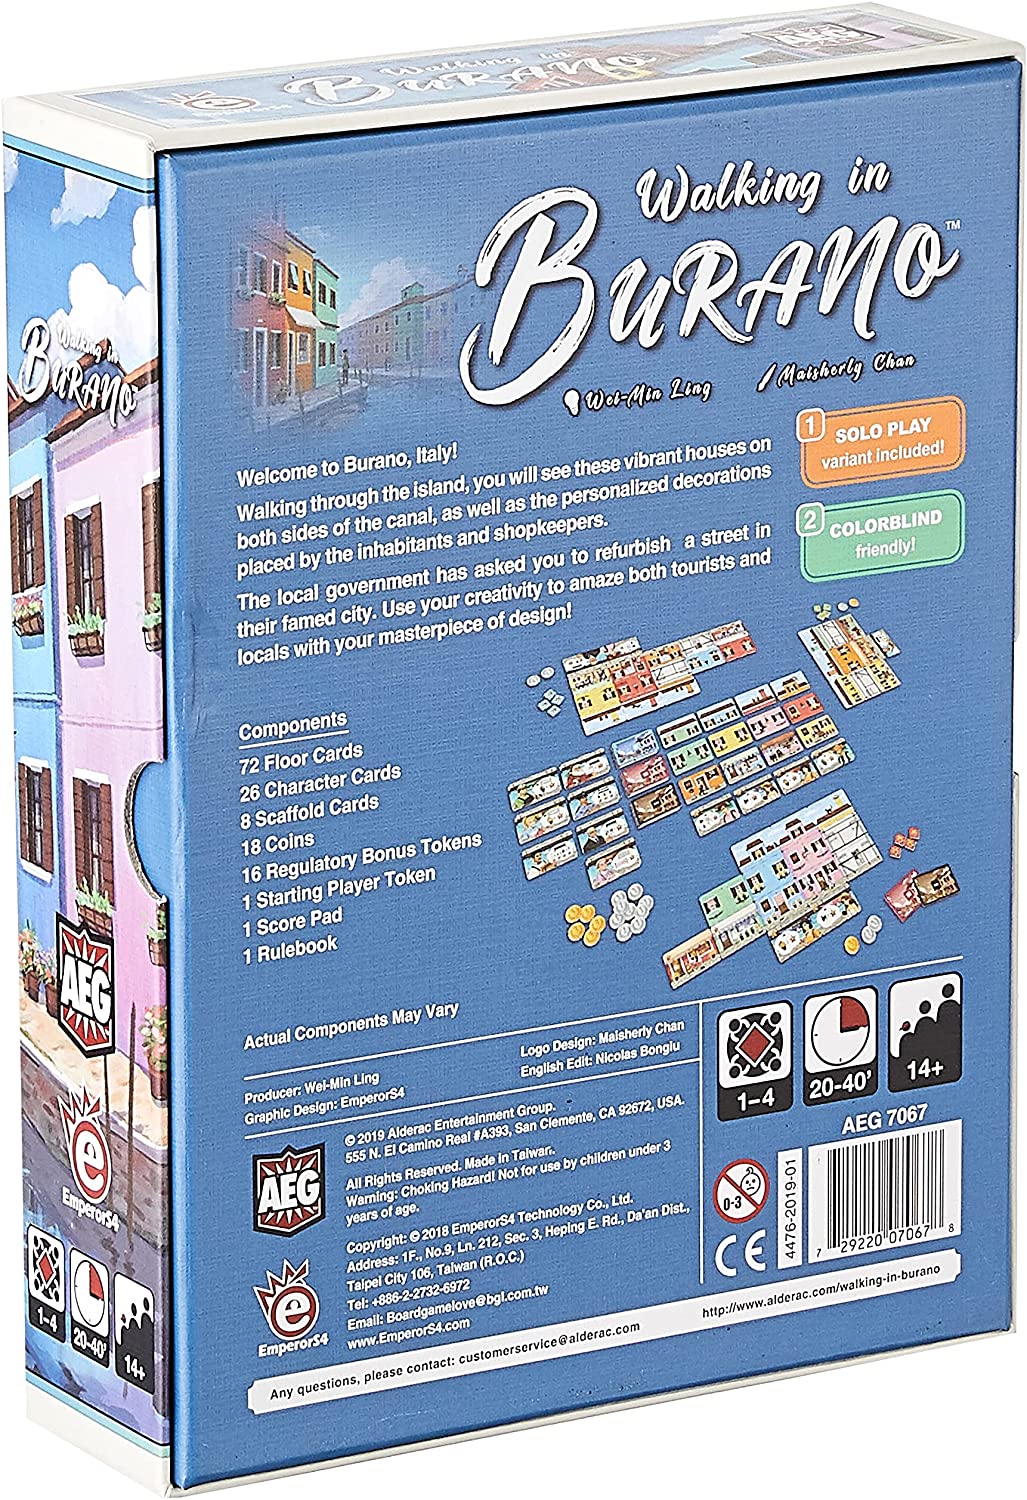 How to play Walking in Burano